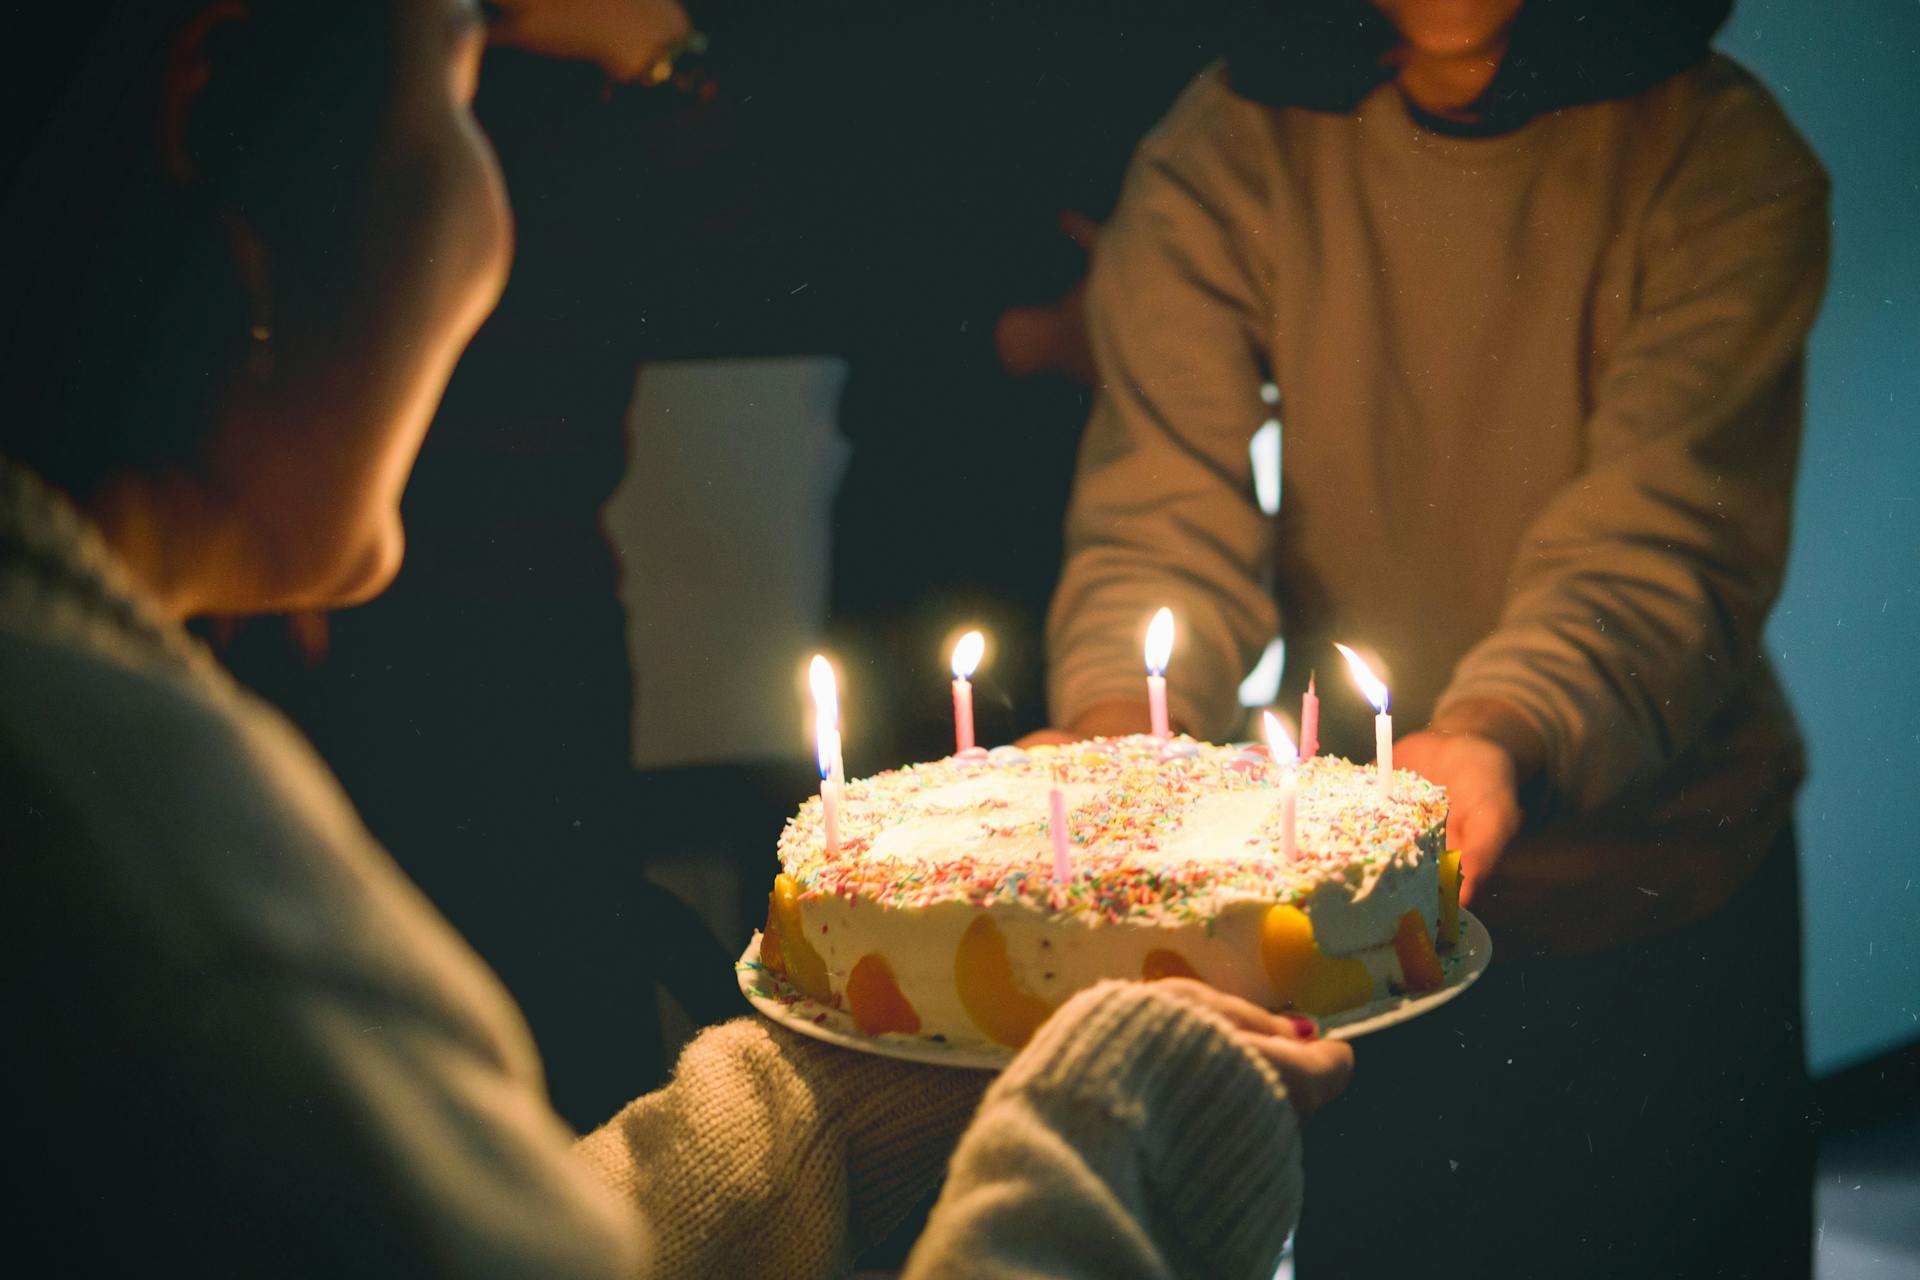 Two people holding cake | Source: Pexels